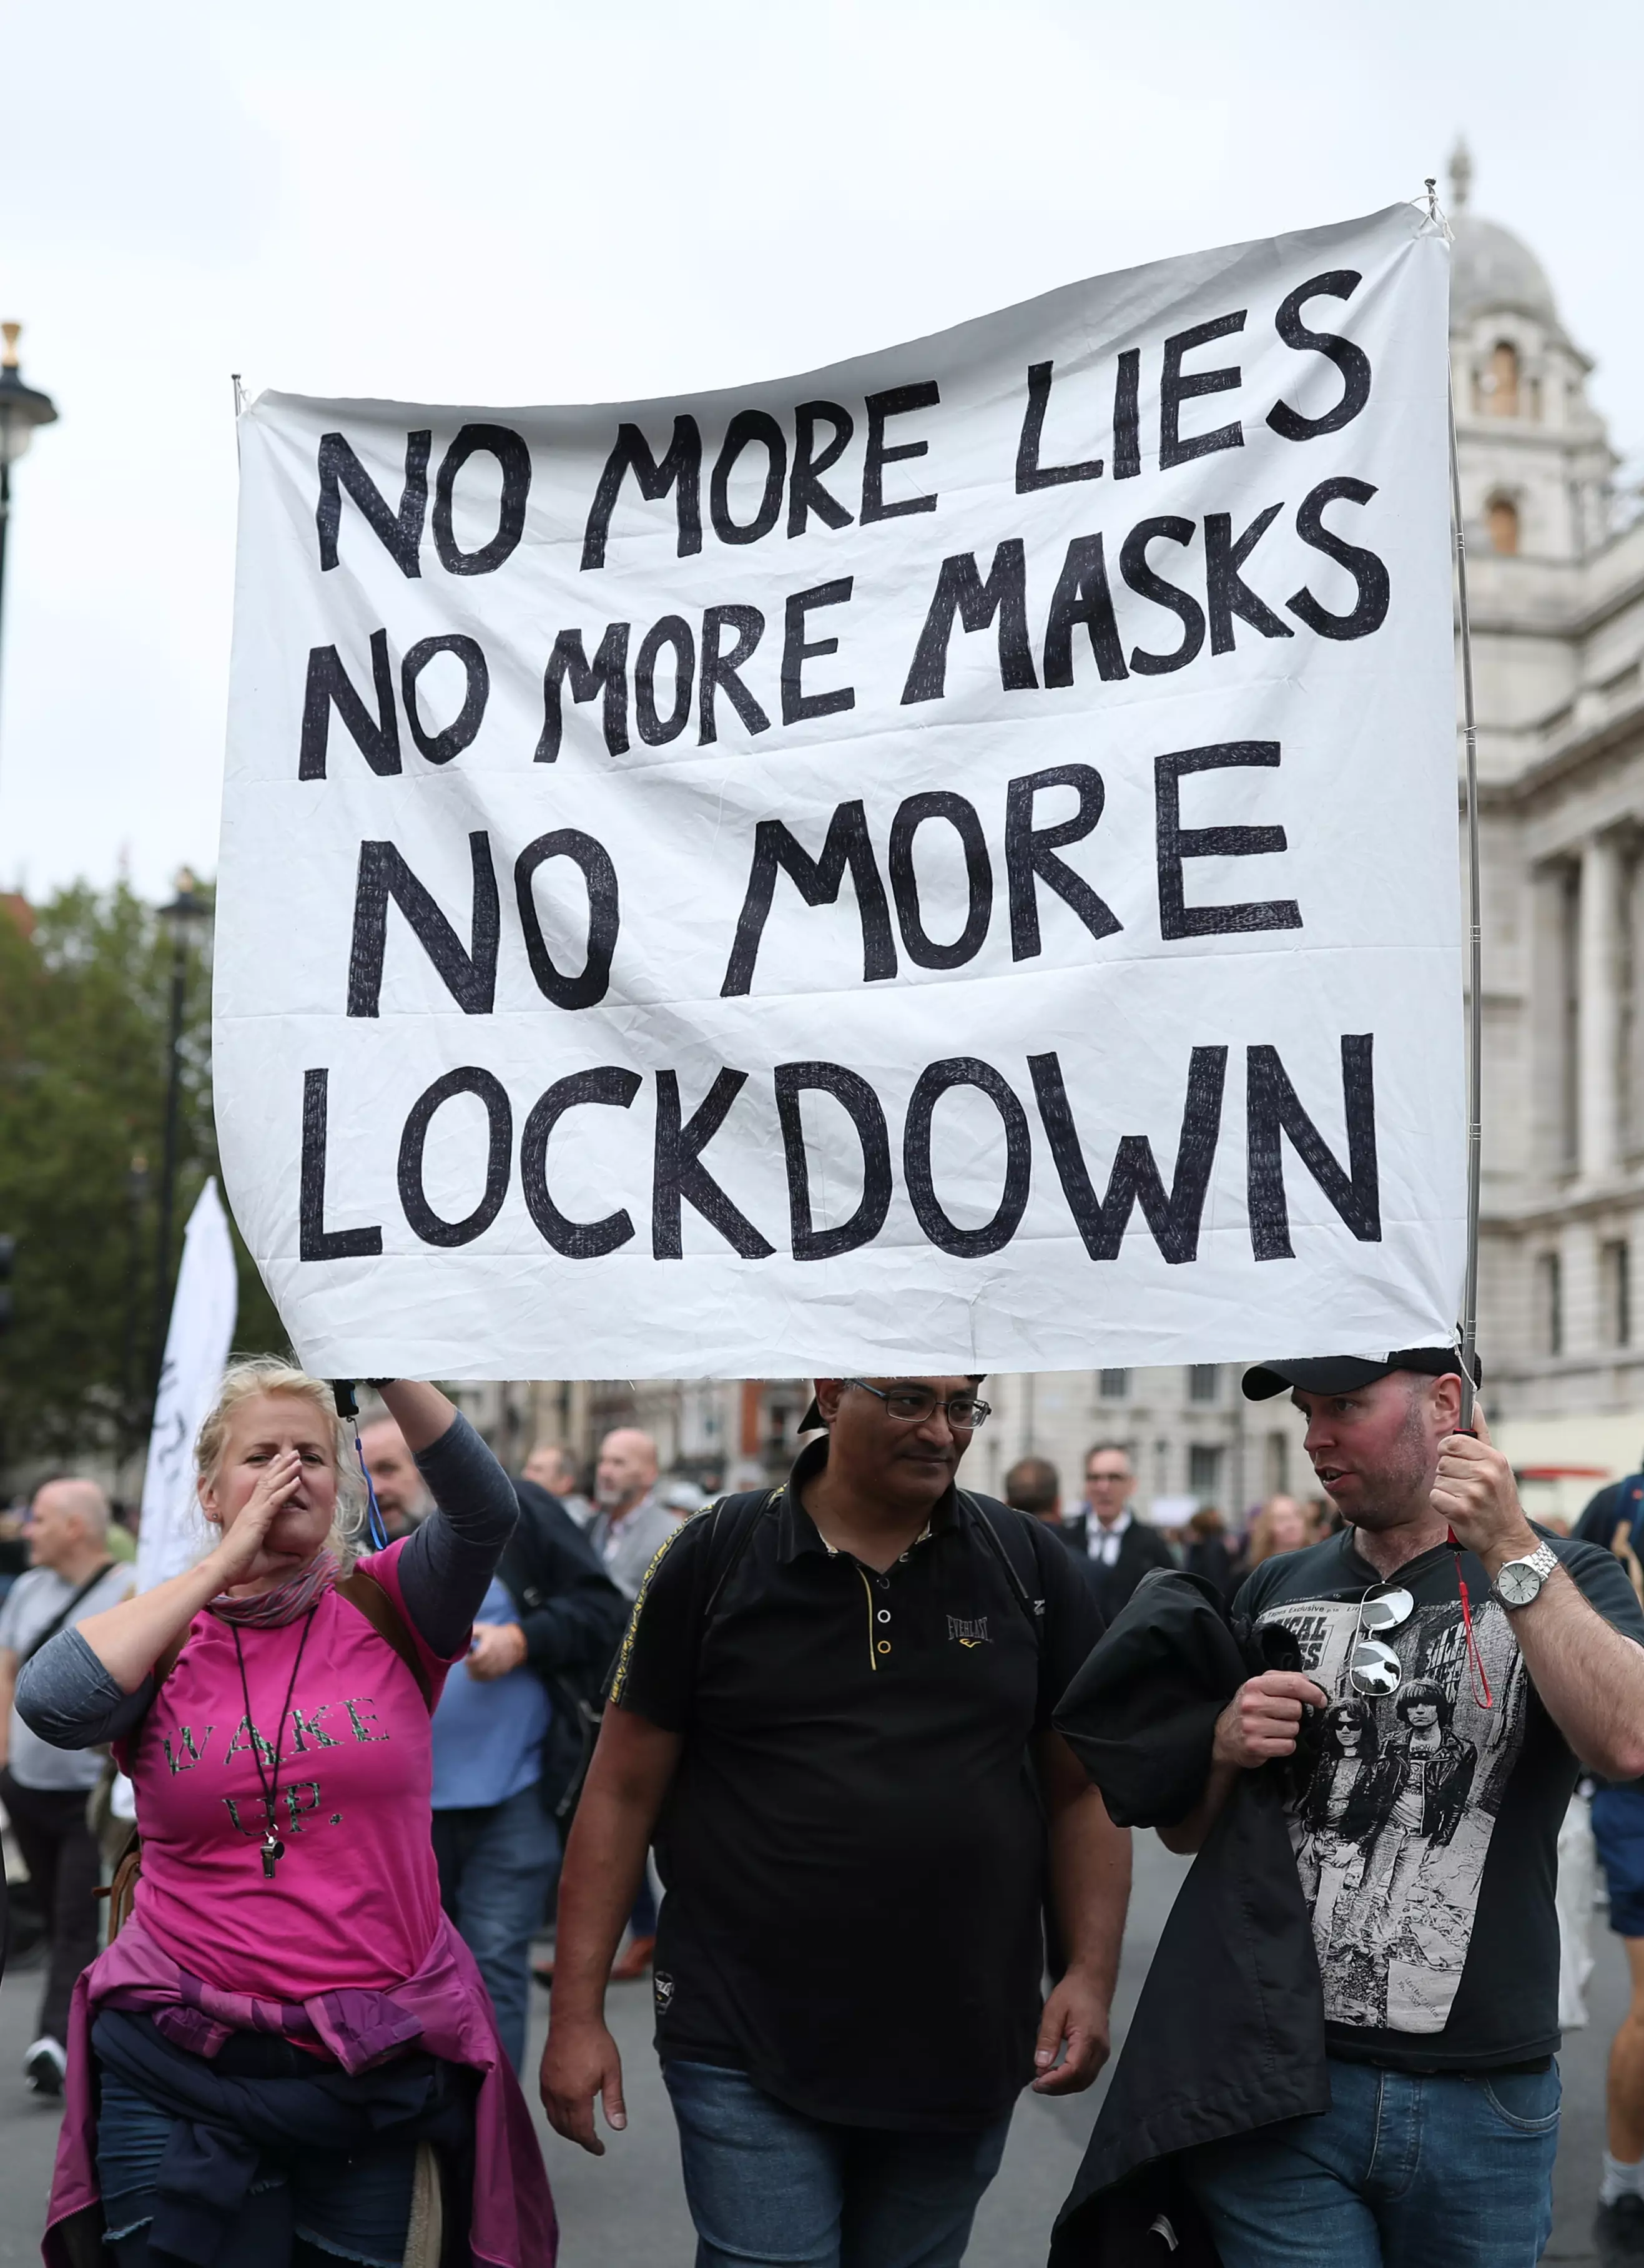 Thousands gathered in London to oppose the government's lockdown measures.